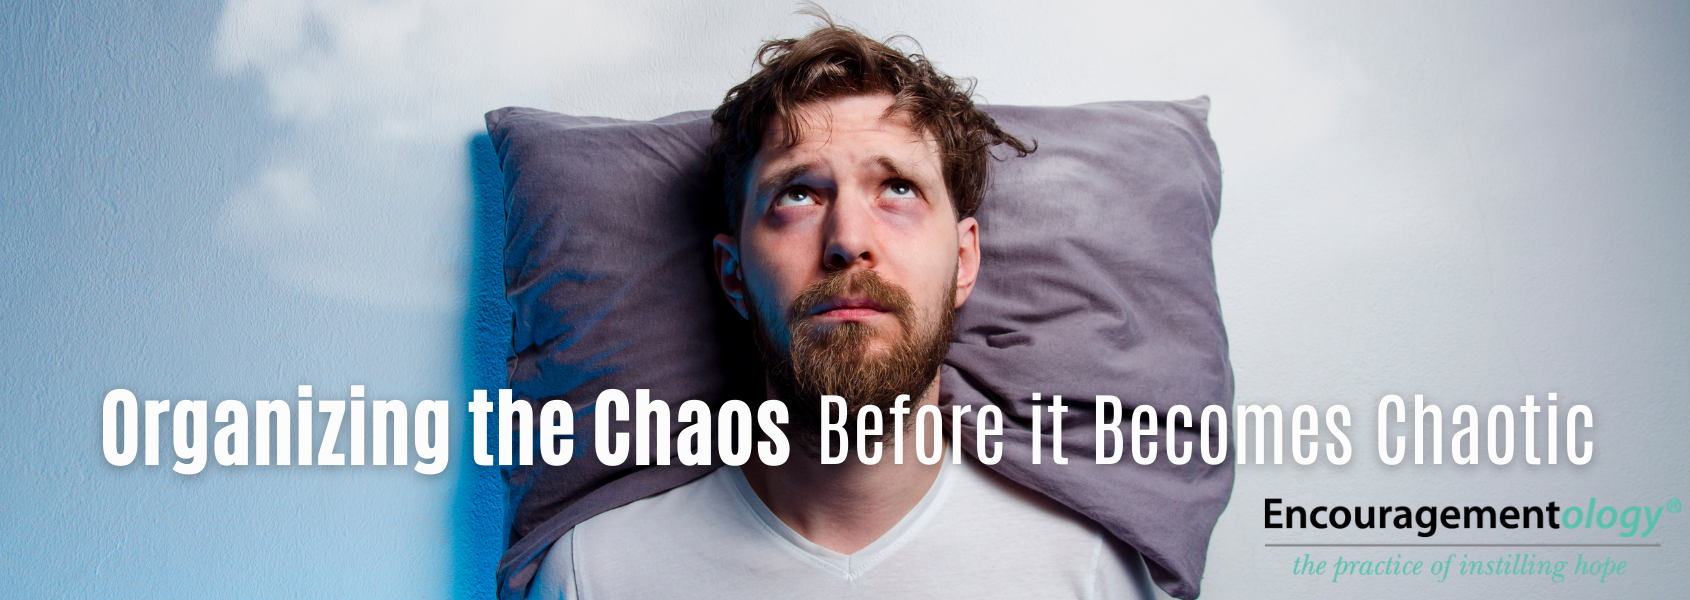 Organizing Chaos Before it Becomes Chaotic